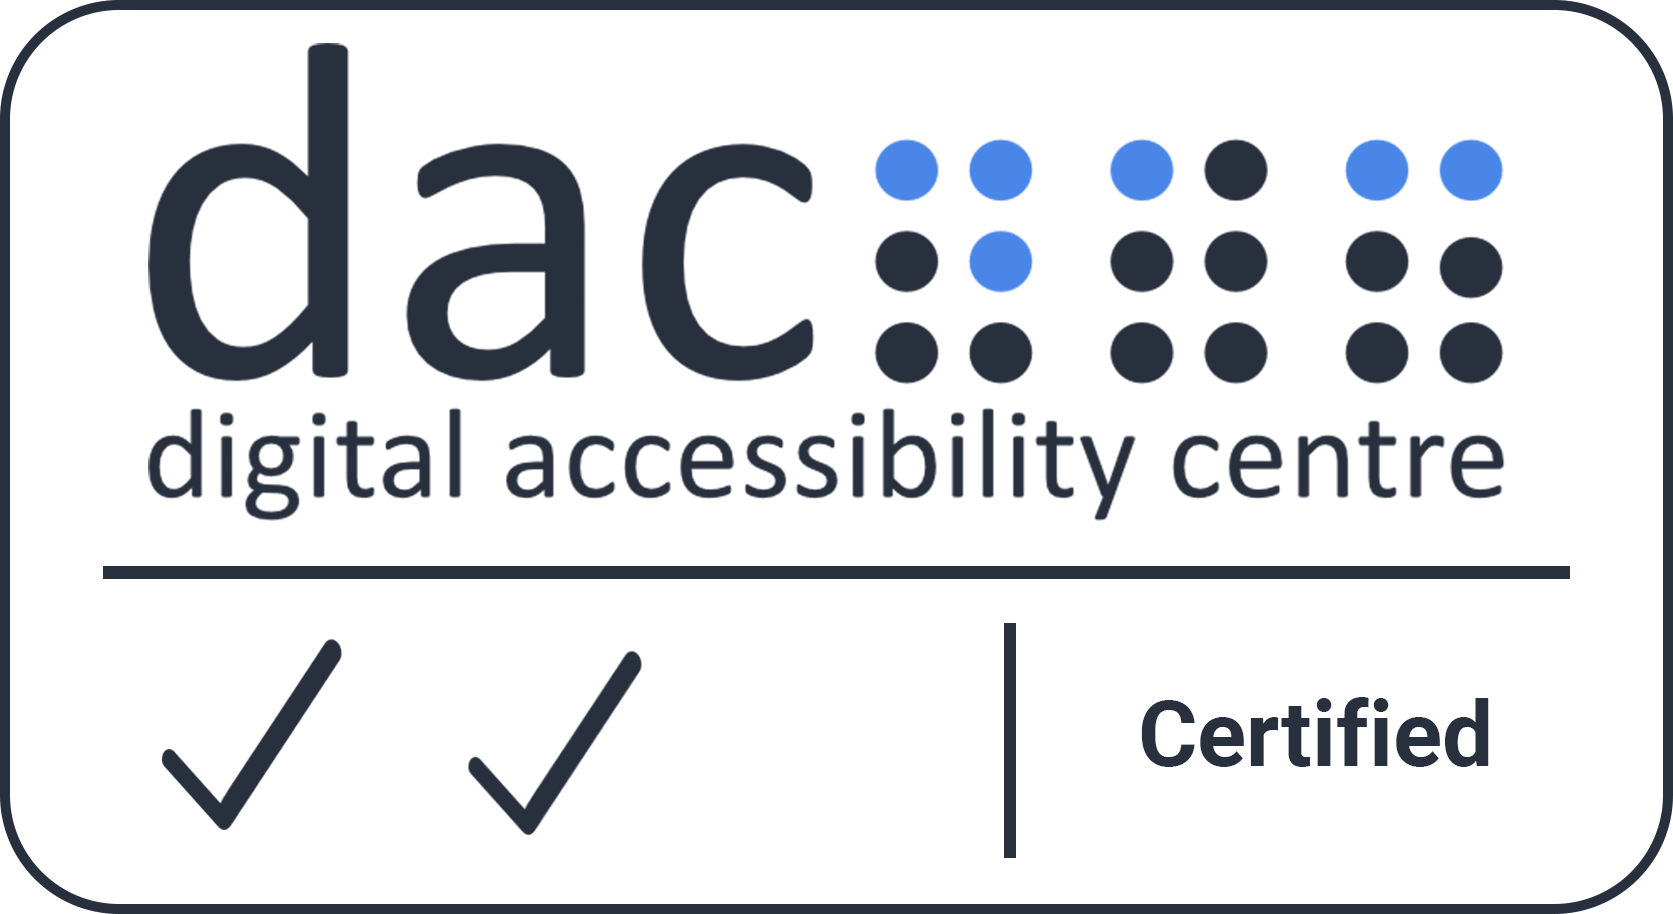 Digital Accessibility Centre Accreditation Certificate opens in a new window